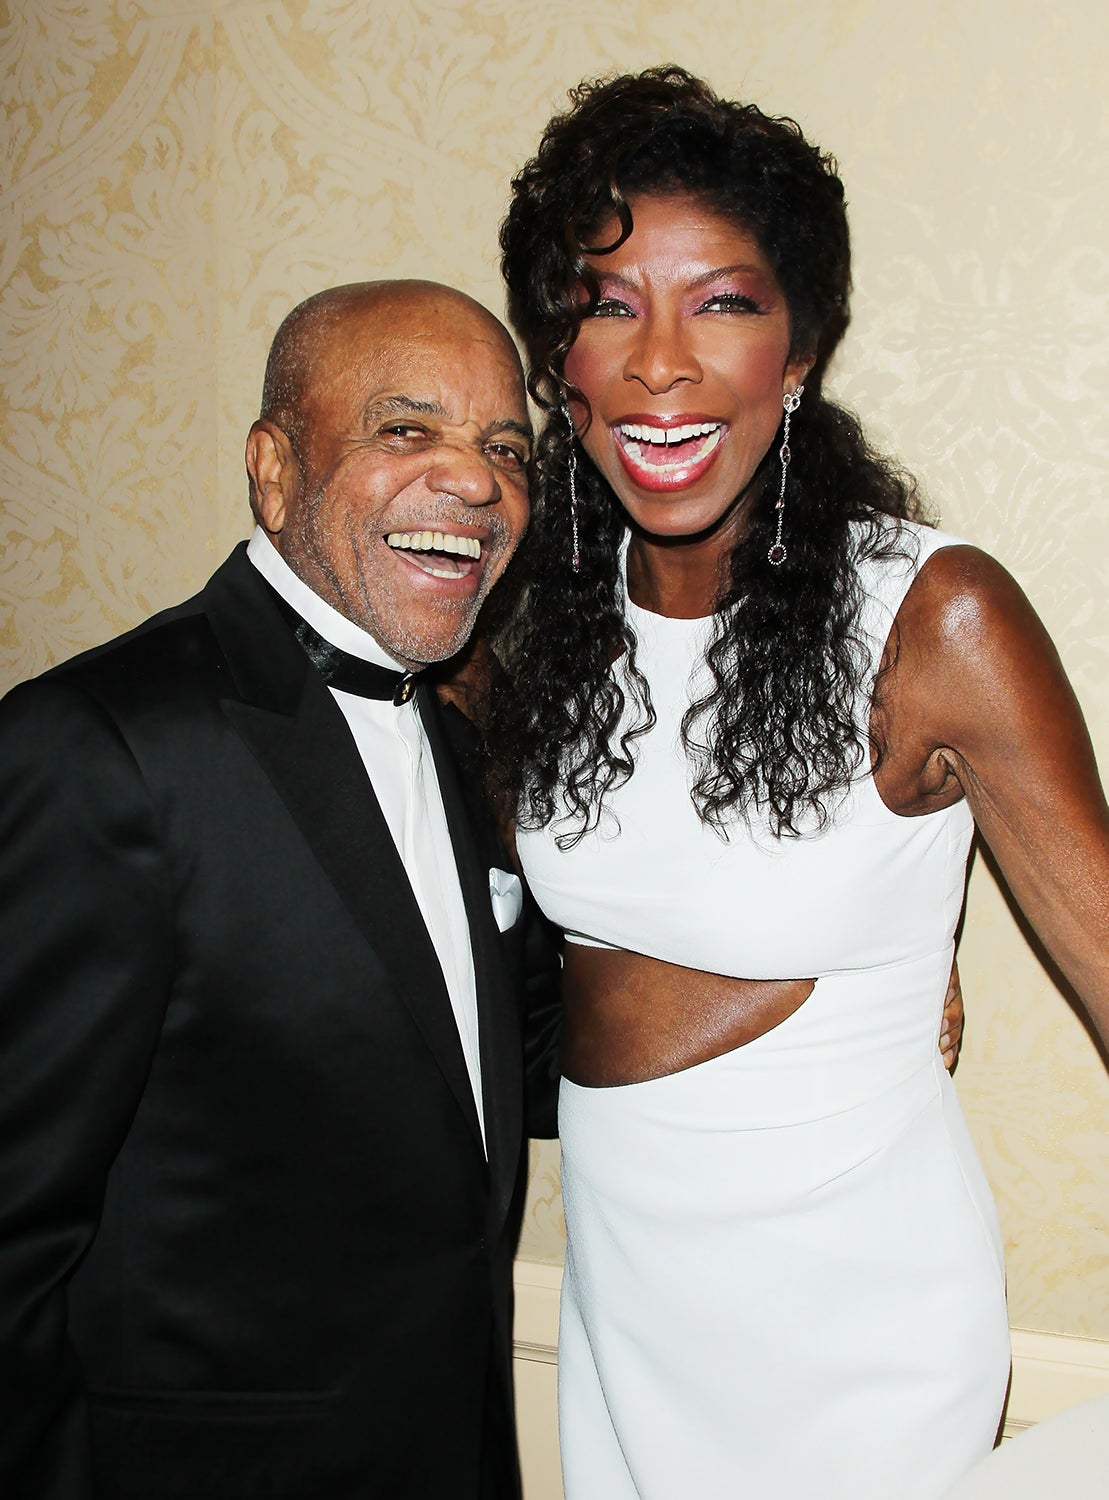 Unforgettable: Natalie Cole's Life in Pictures